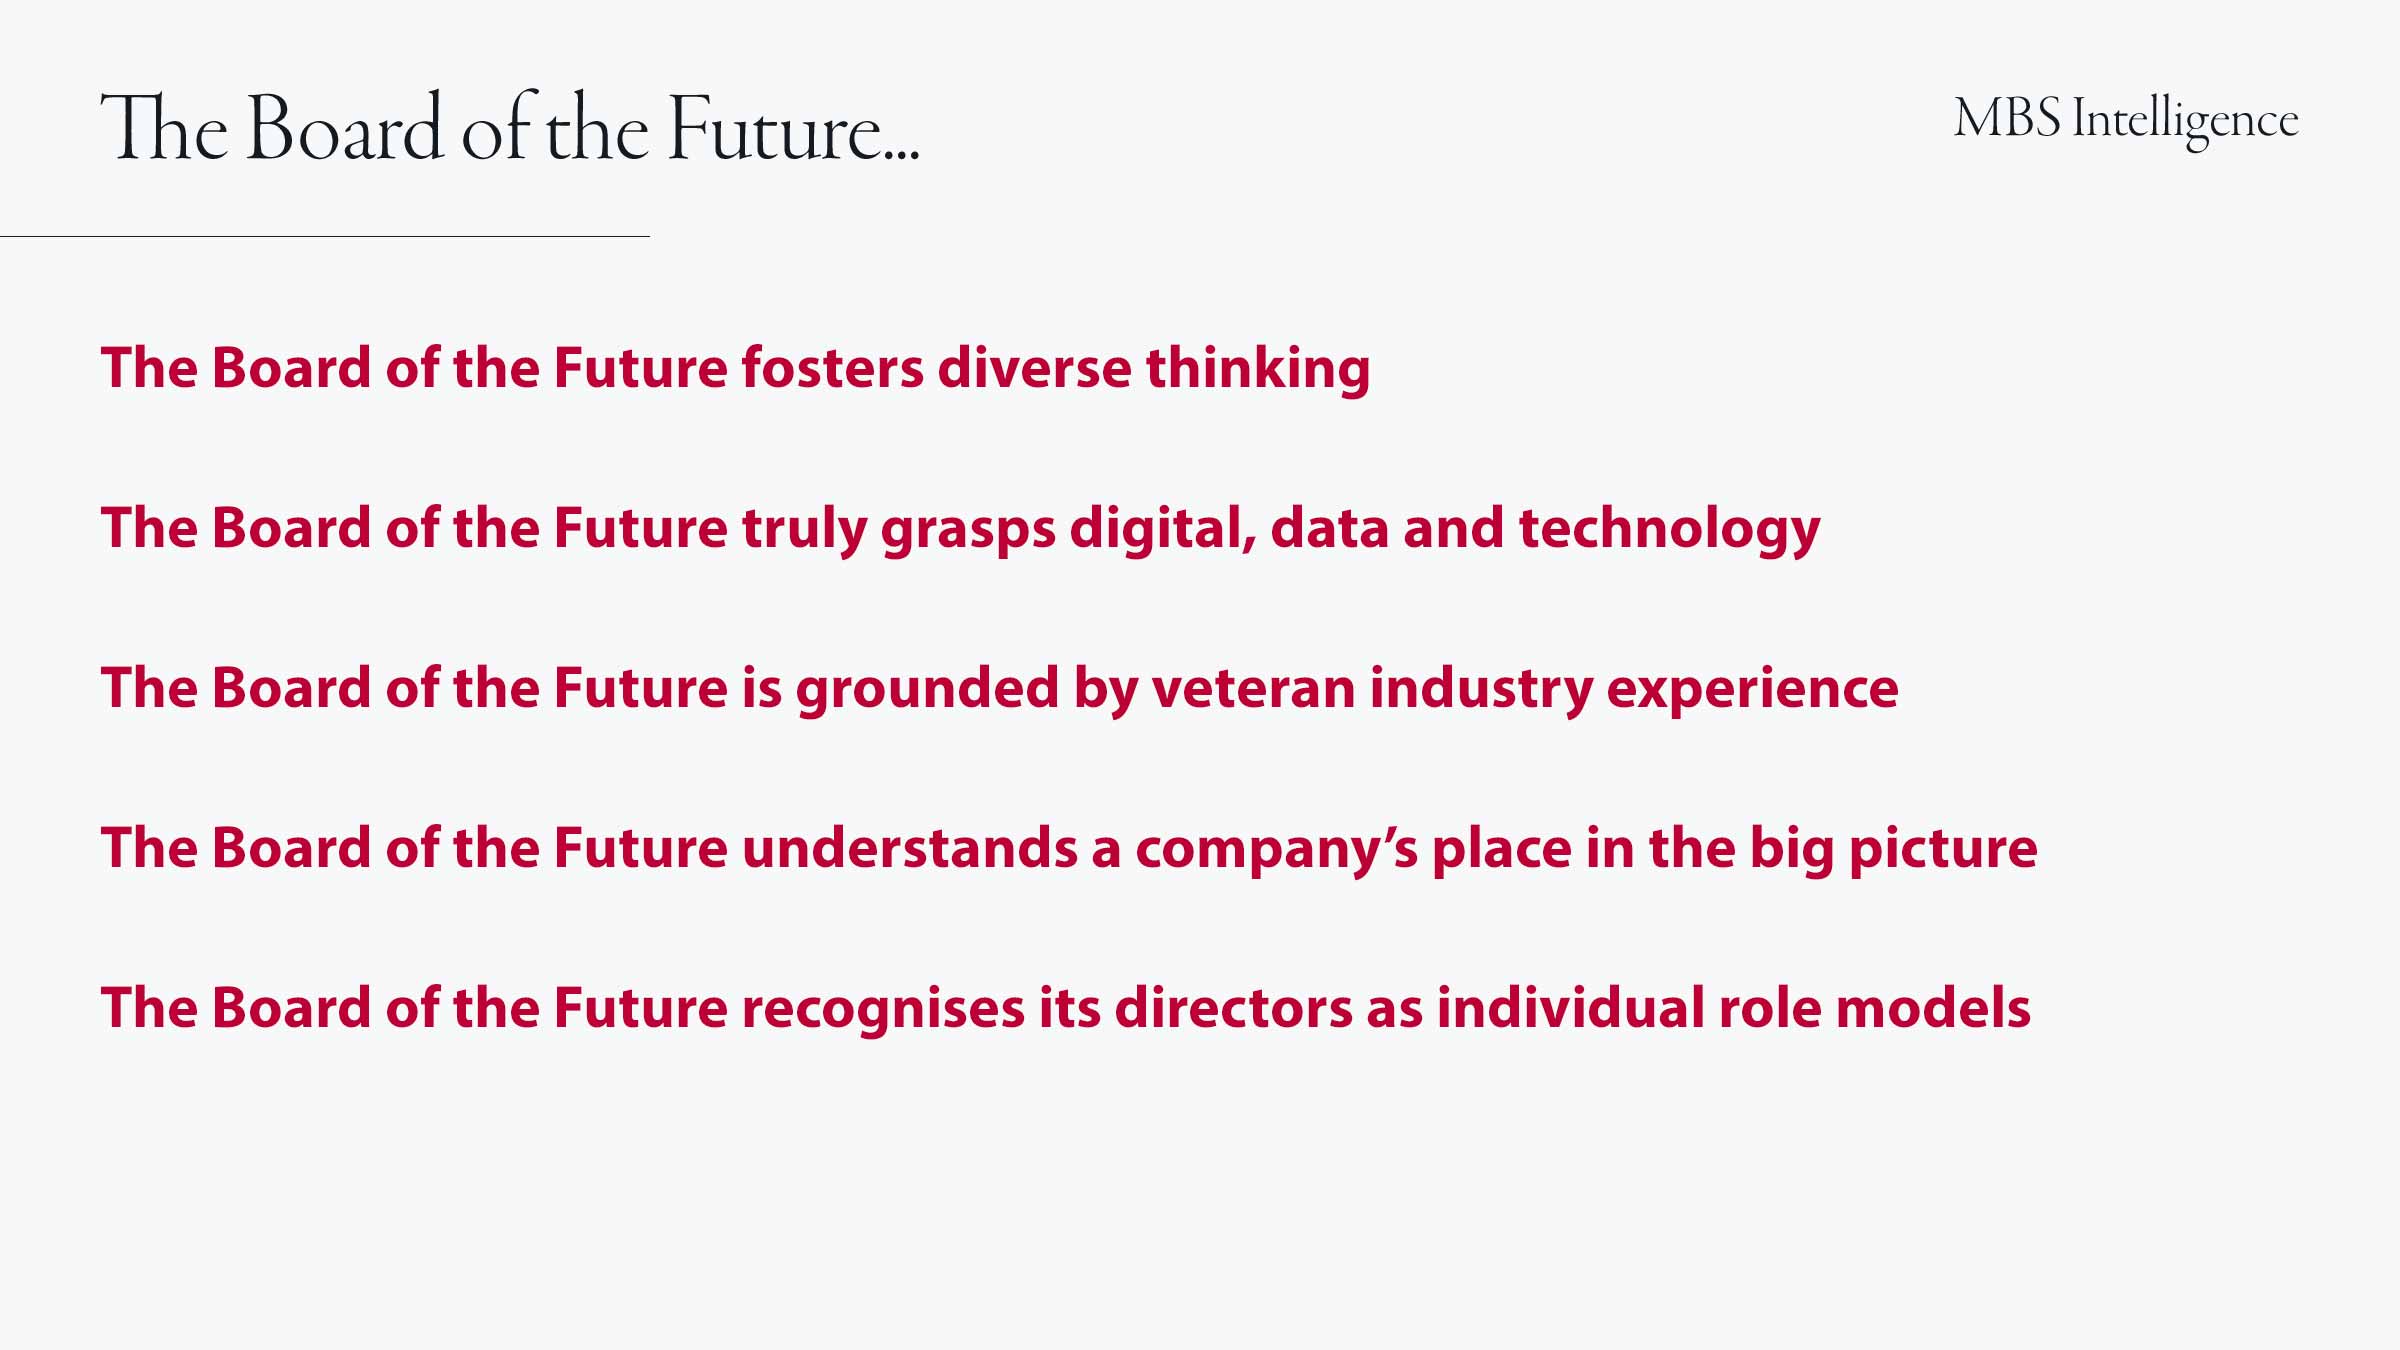 The Board of the future: fosters diverse thinking; truly grasps digital; is grounded in industry experience; understands a company's place in the big picture; and recognises its directors as individual role models. 